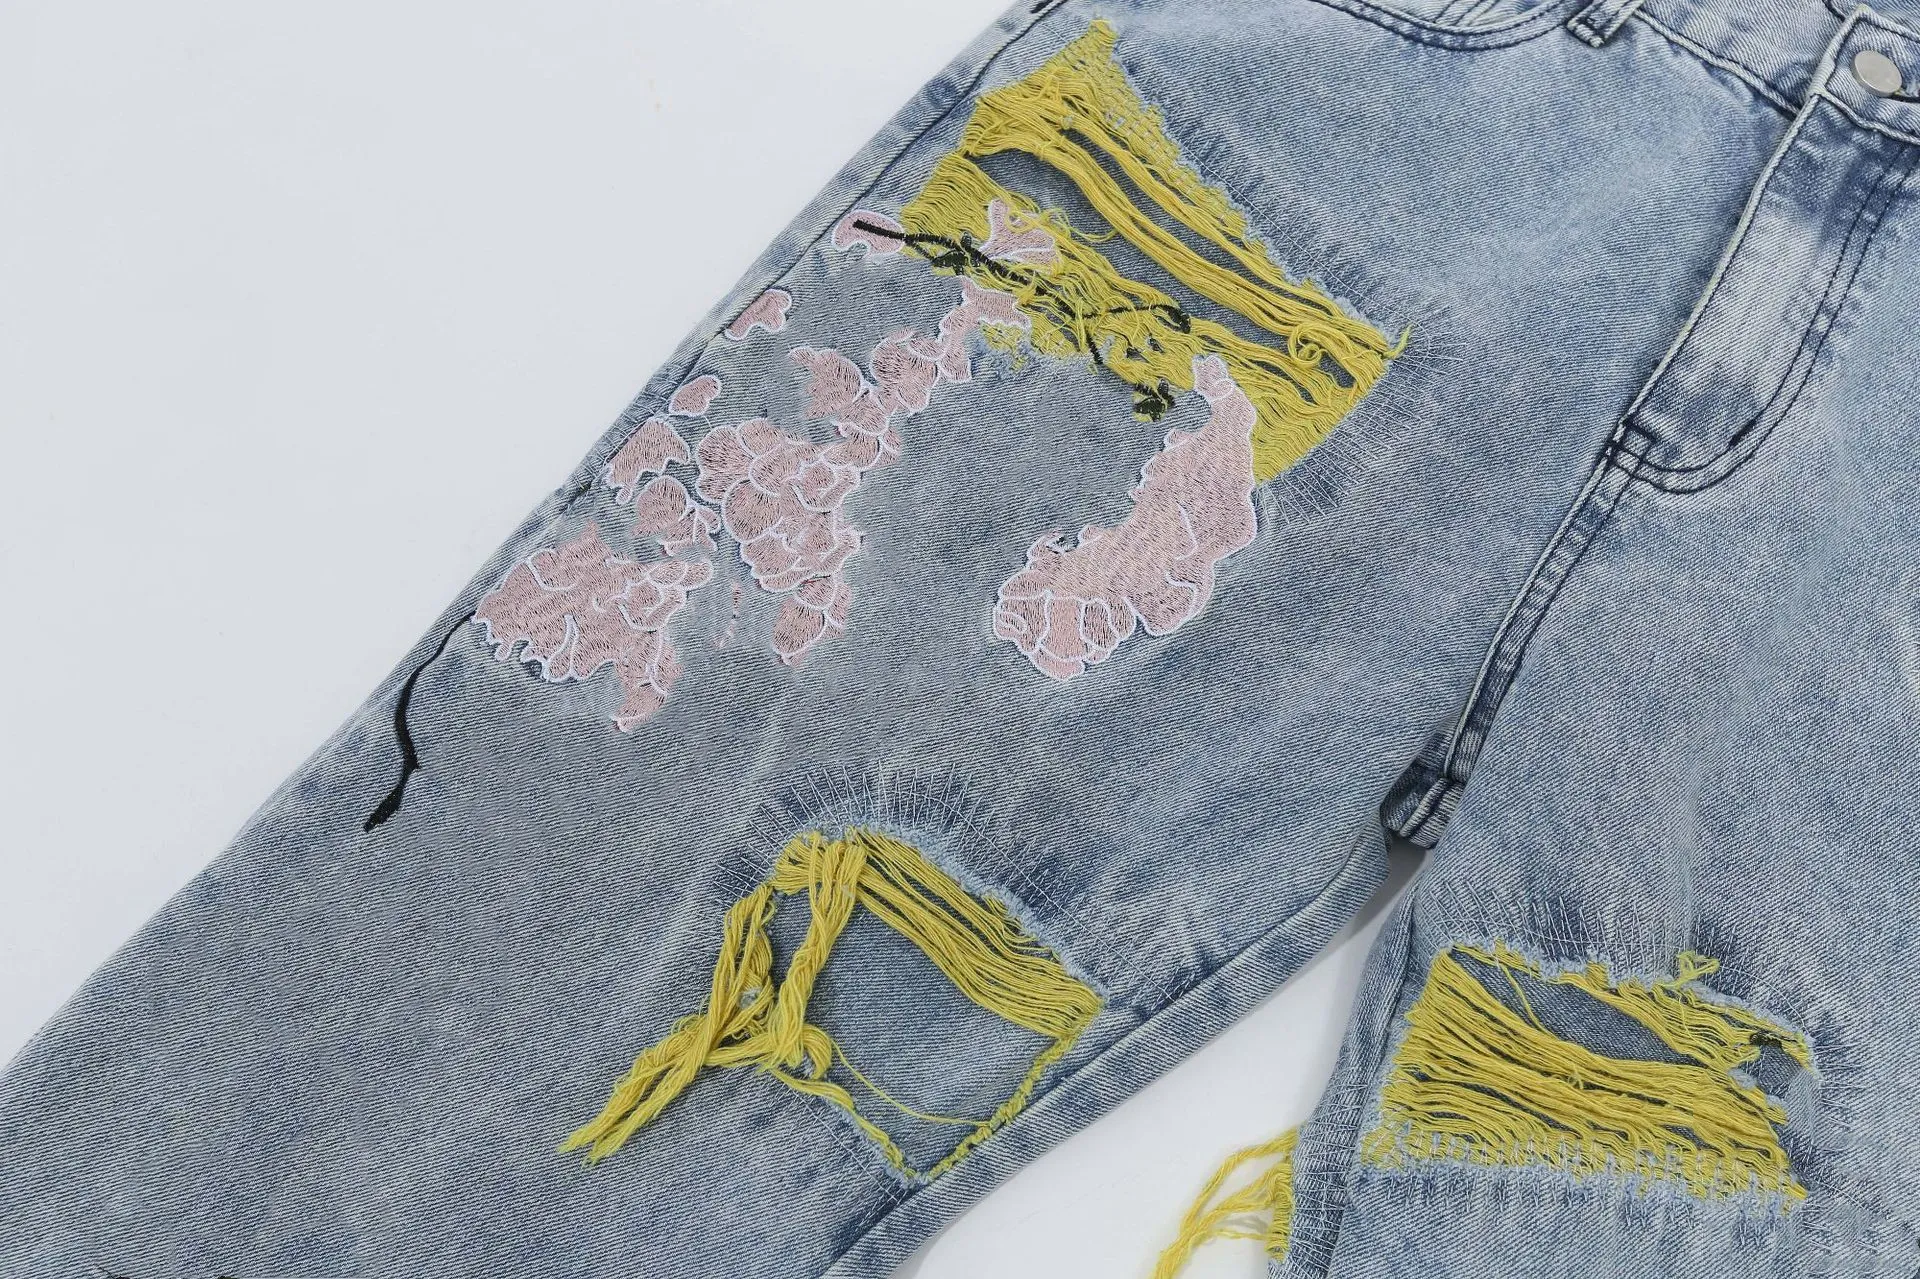 Mens Jeans Oversized Designer Denim Embroidered Ripped Jean High Street Hole Wide-leg Trousers Casual Clothing Pants S-3XL Megogh-8 CXG8181